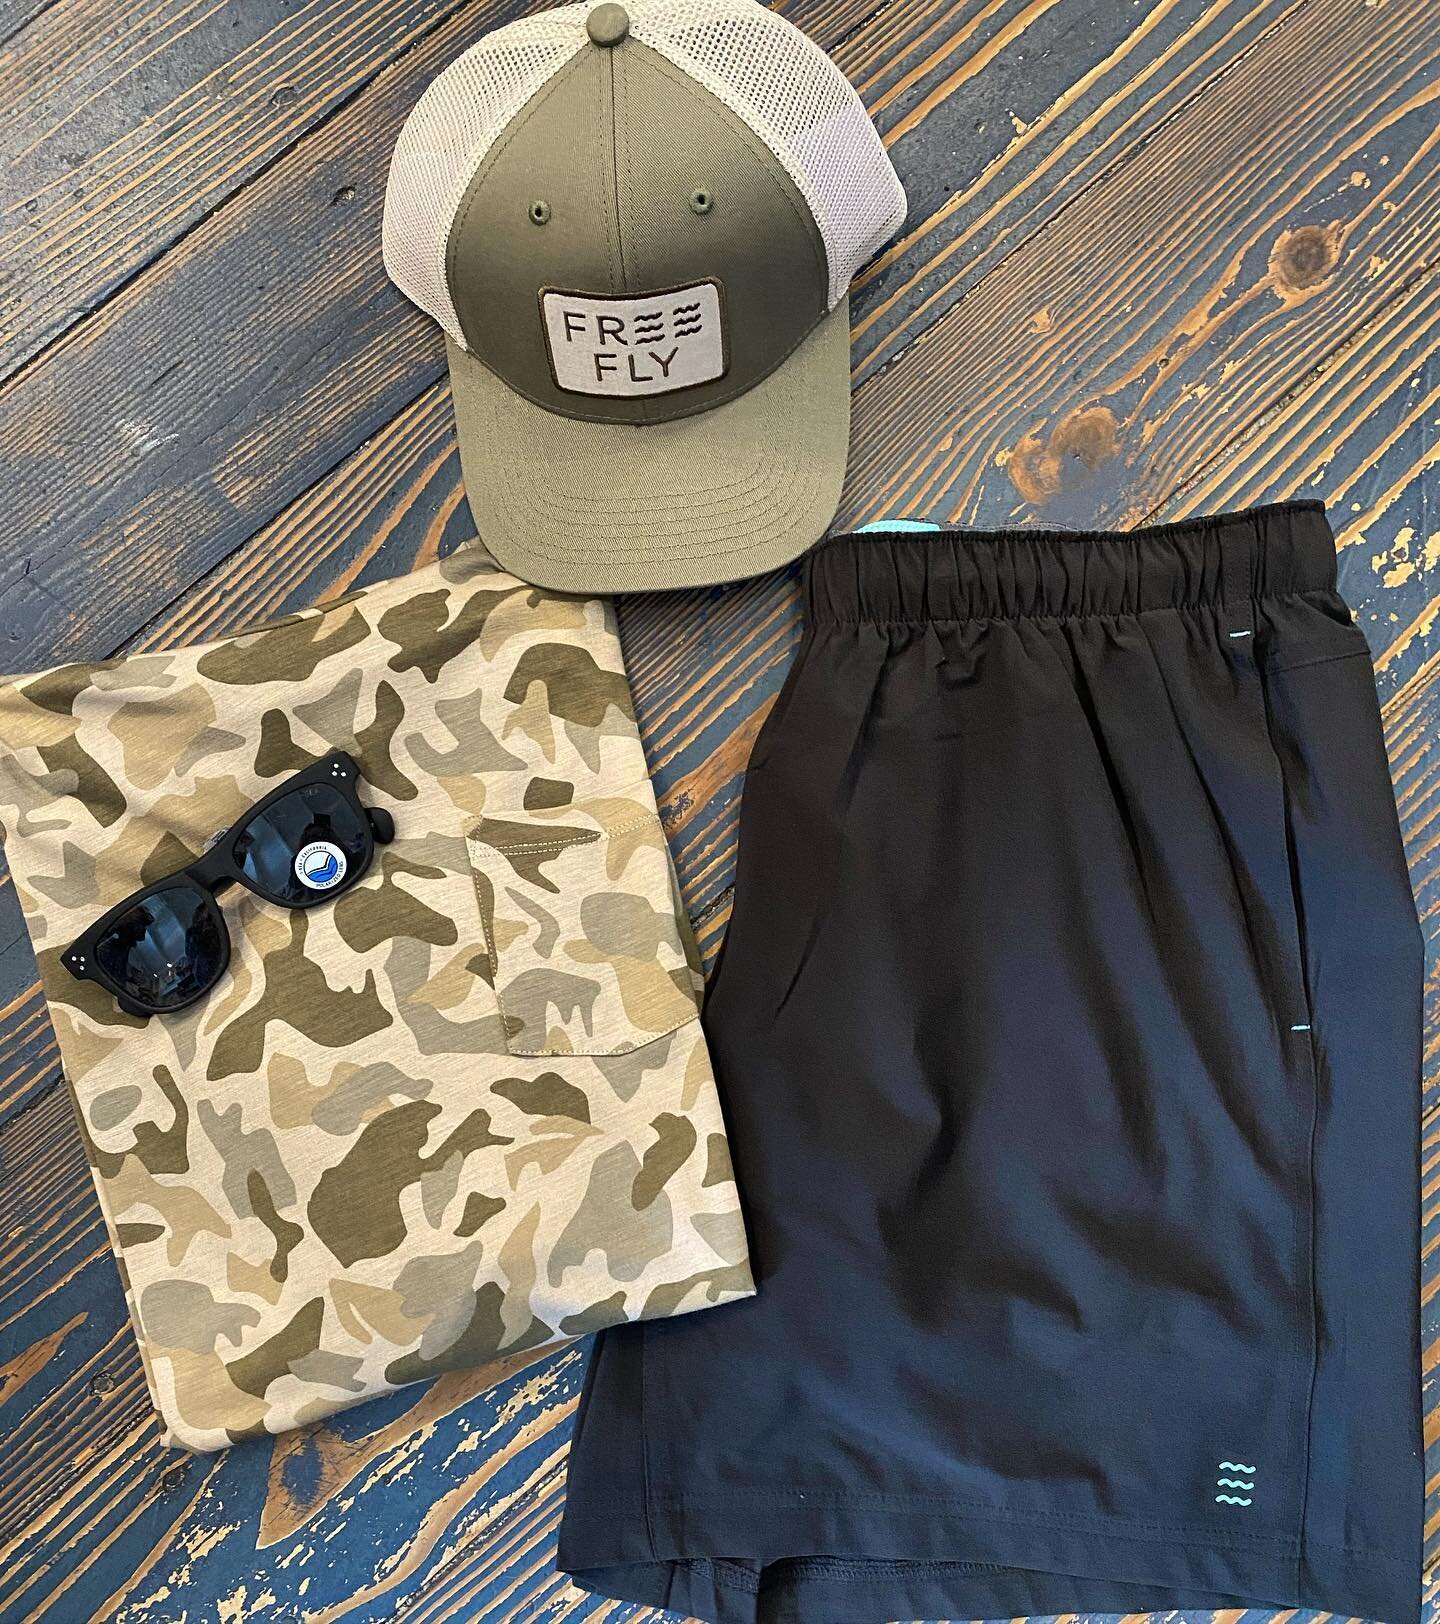 New arrivals for the men are here! @freeflyapparel